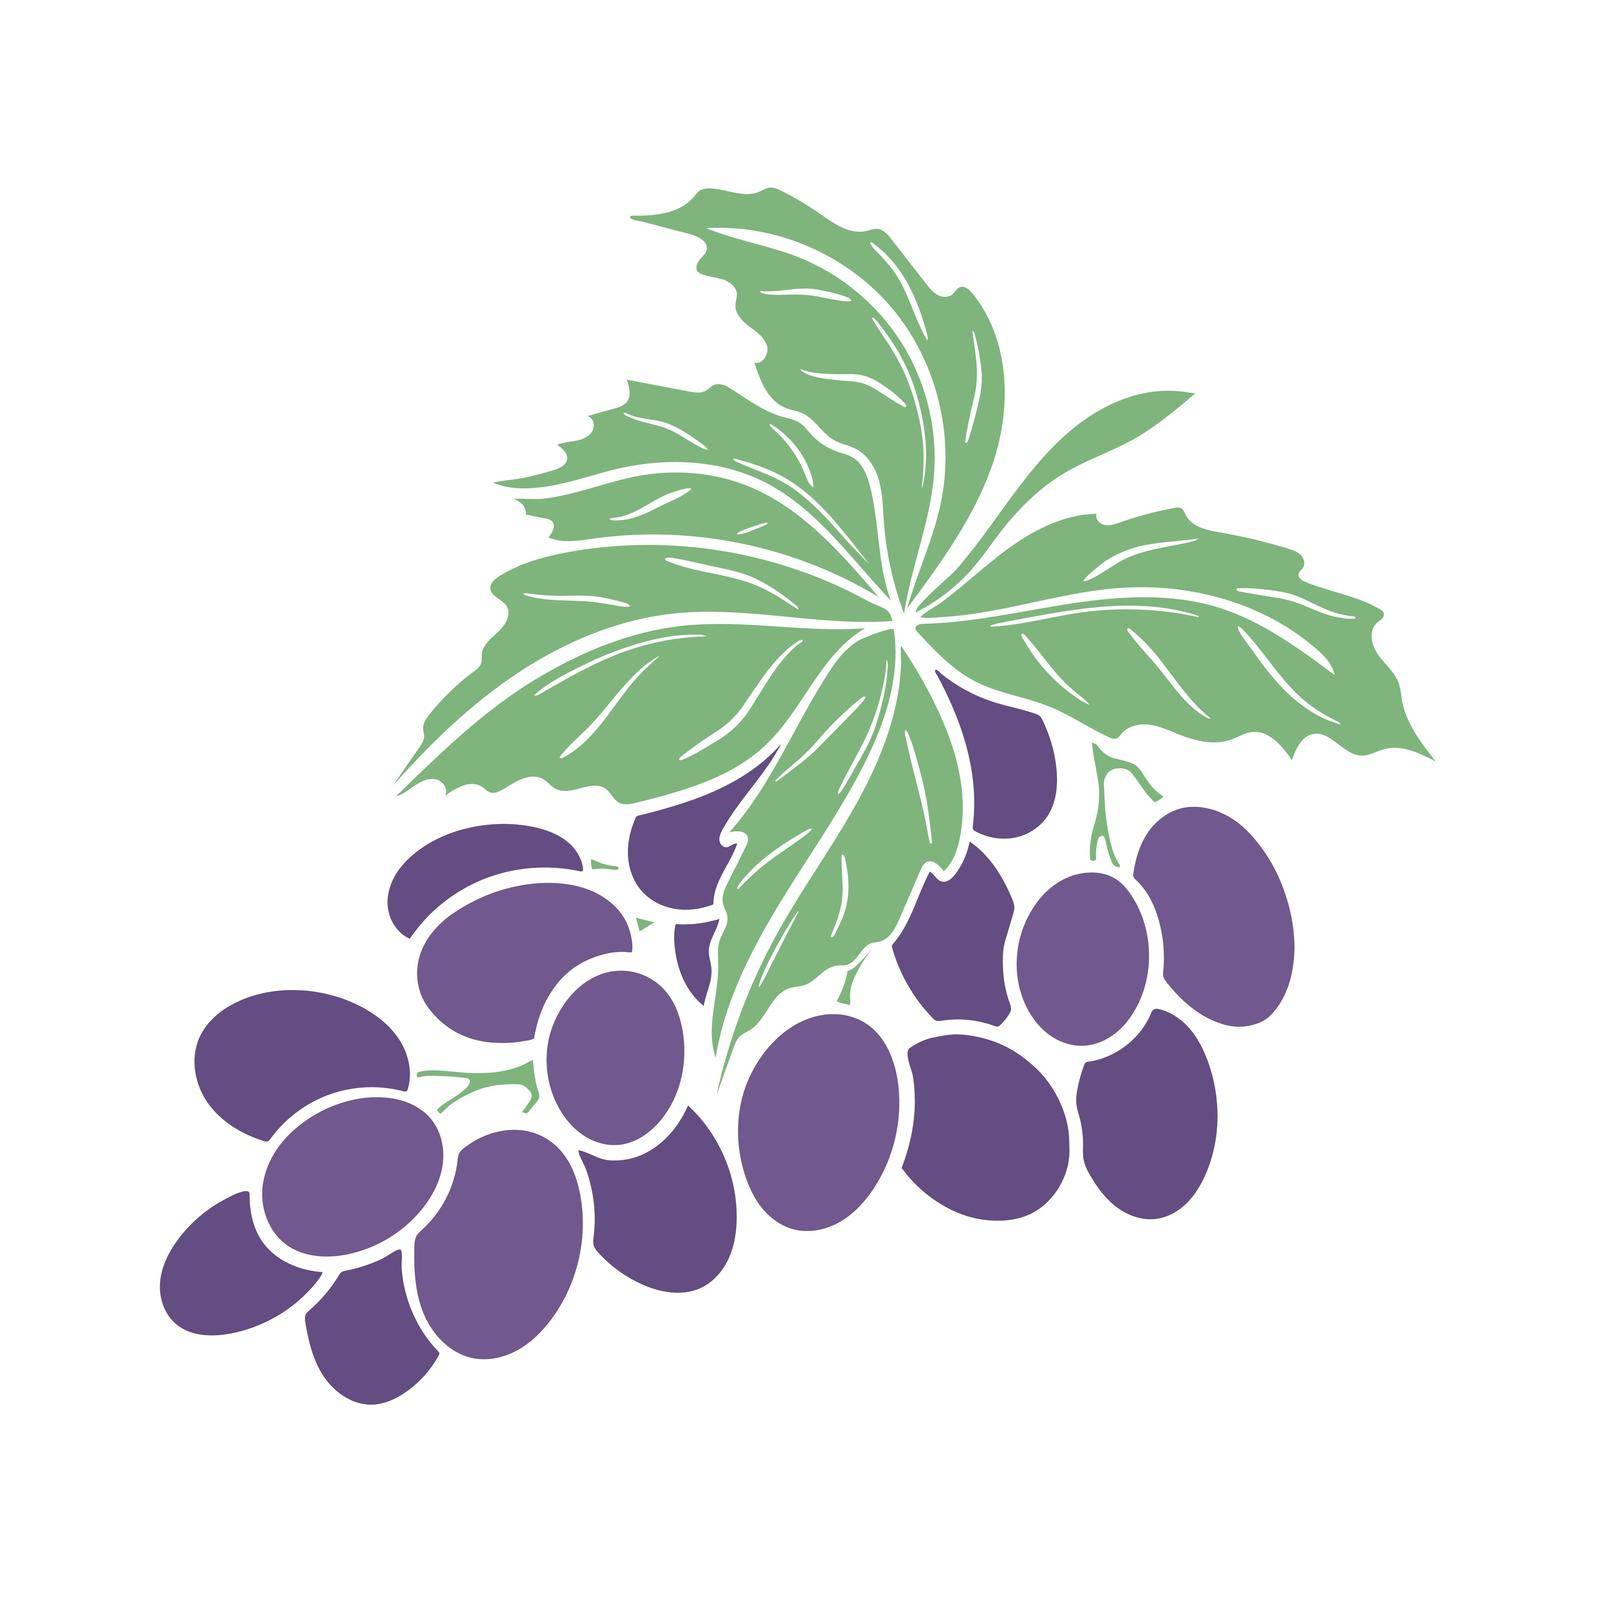 Grapes branch isolated vector illustration. Purple grape leaves clipart. Simple berry bunch with foliage. Healthy organic food. Wine material for beverage production